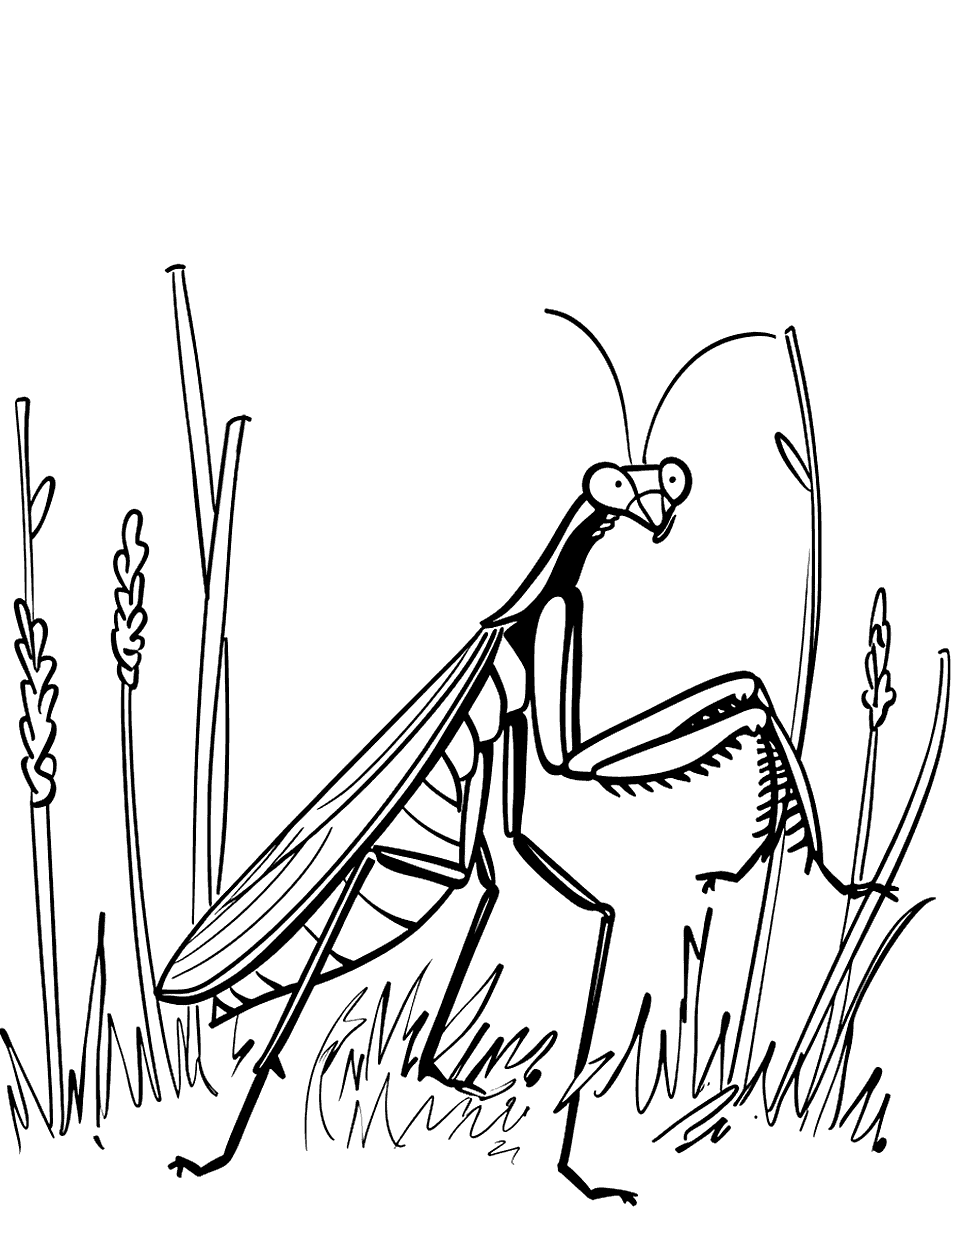 Mantis Hunting in Tall Grass Insect Coloring Page - A mantis poised stealthily among tall grass.